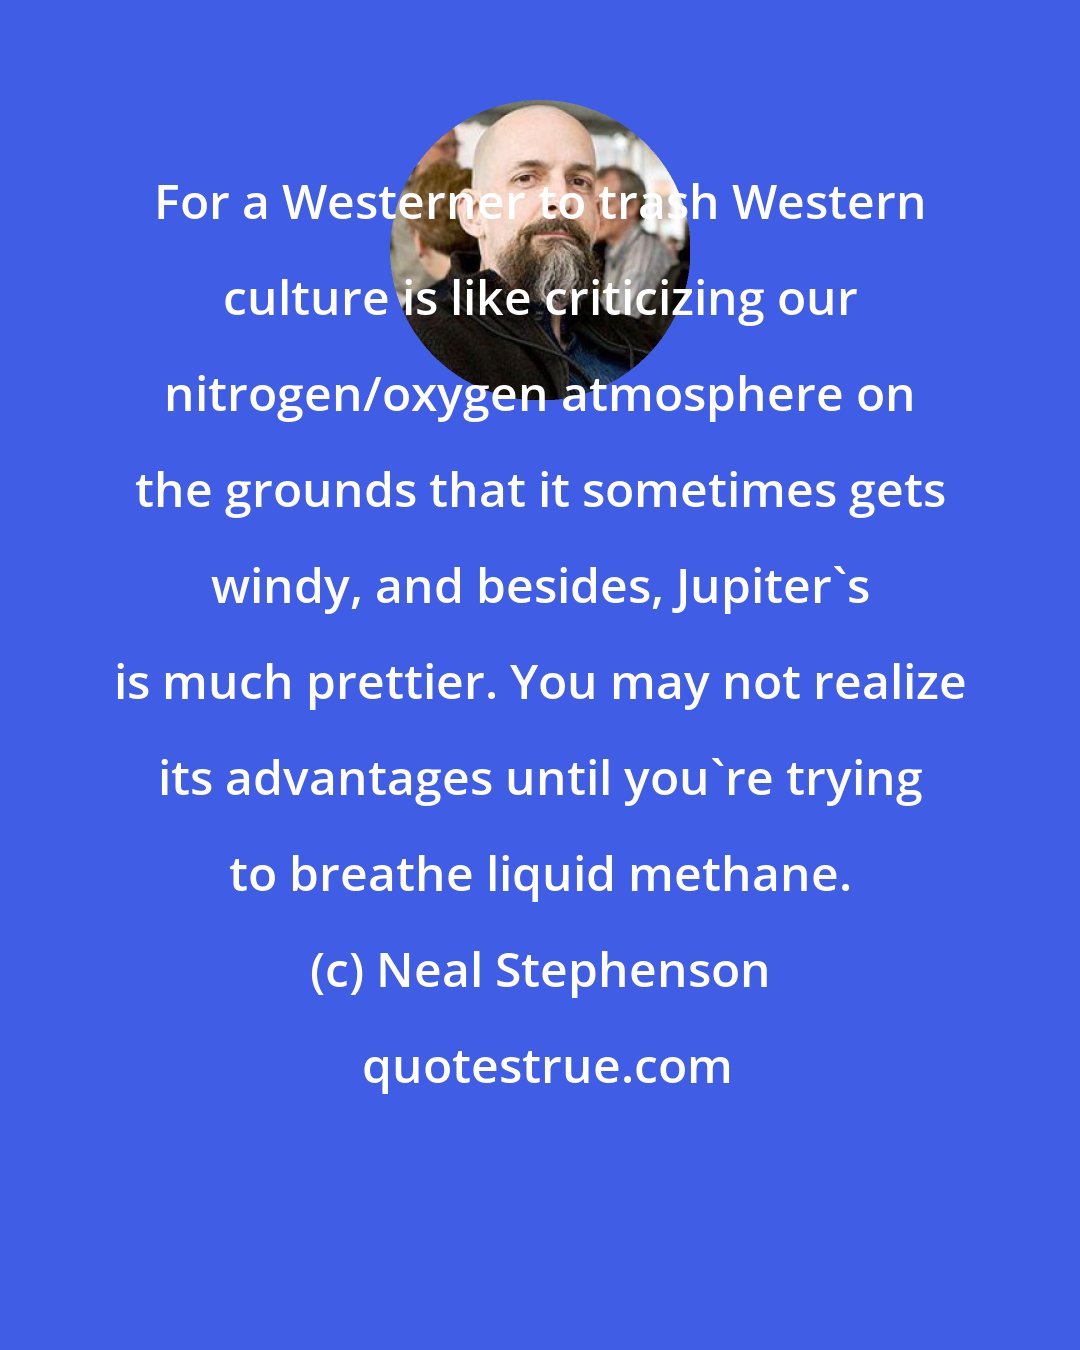 Neal Stephenson: For a Westerner to trash Western culture is like criticizing our nitrogen/oxygen atmosphere on the grounds that it sometimes gets windy, and besides, Jupiter's is much prettier. You may not realize its advantages until you're trying to breathe liquid methane.